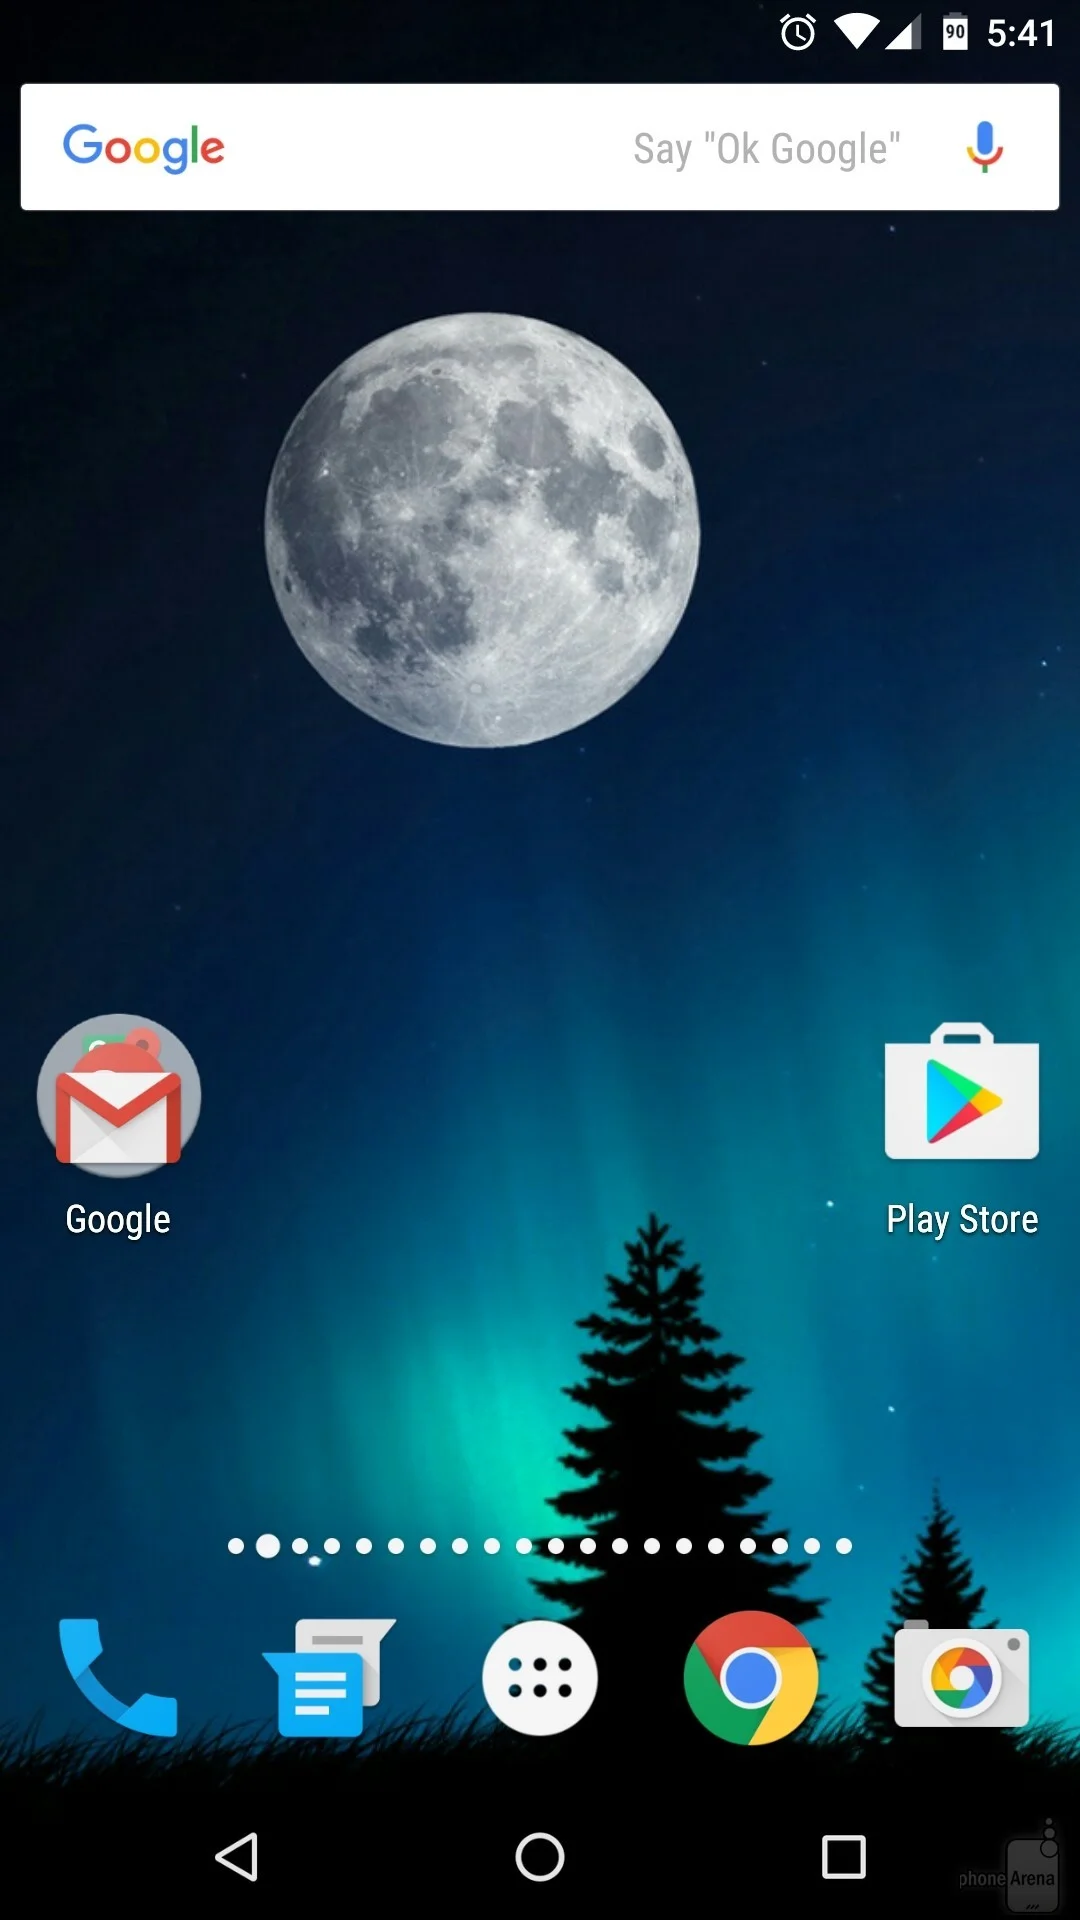 From the Google Now home screen, long press anywhere on the wallpaper